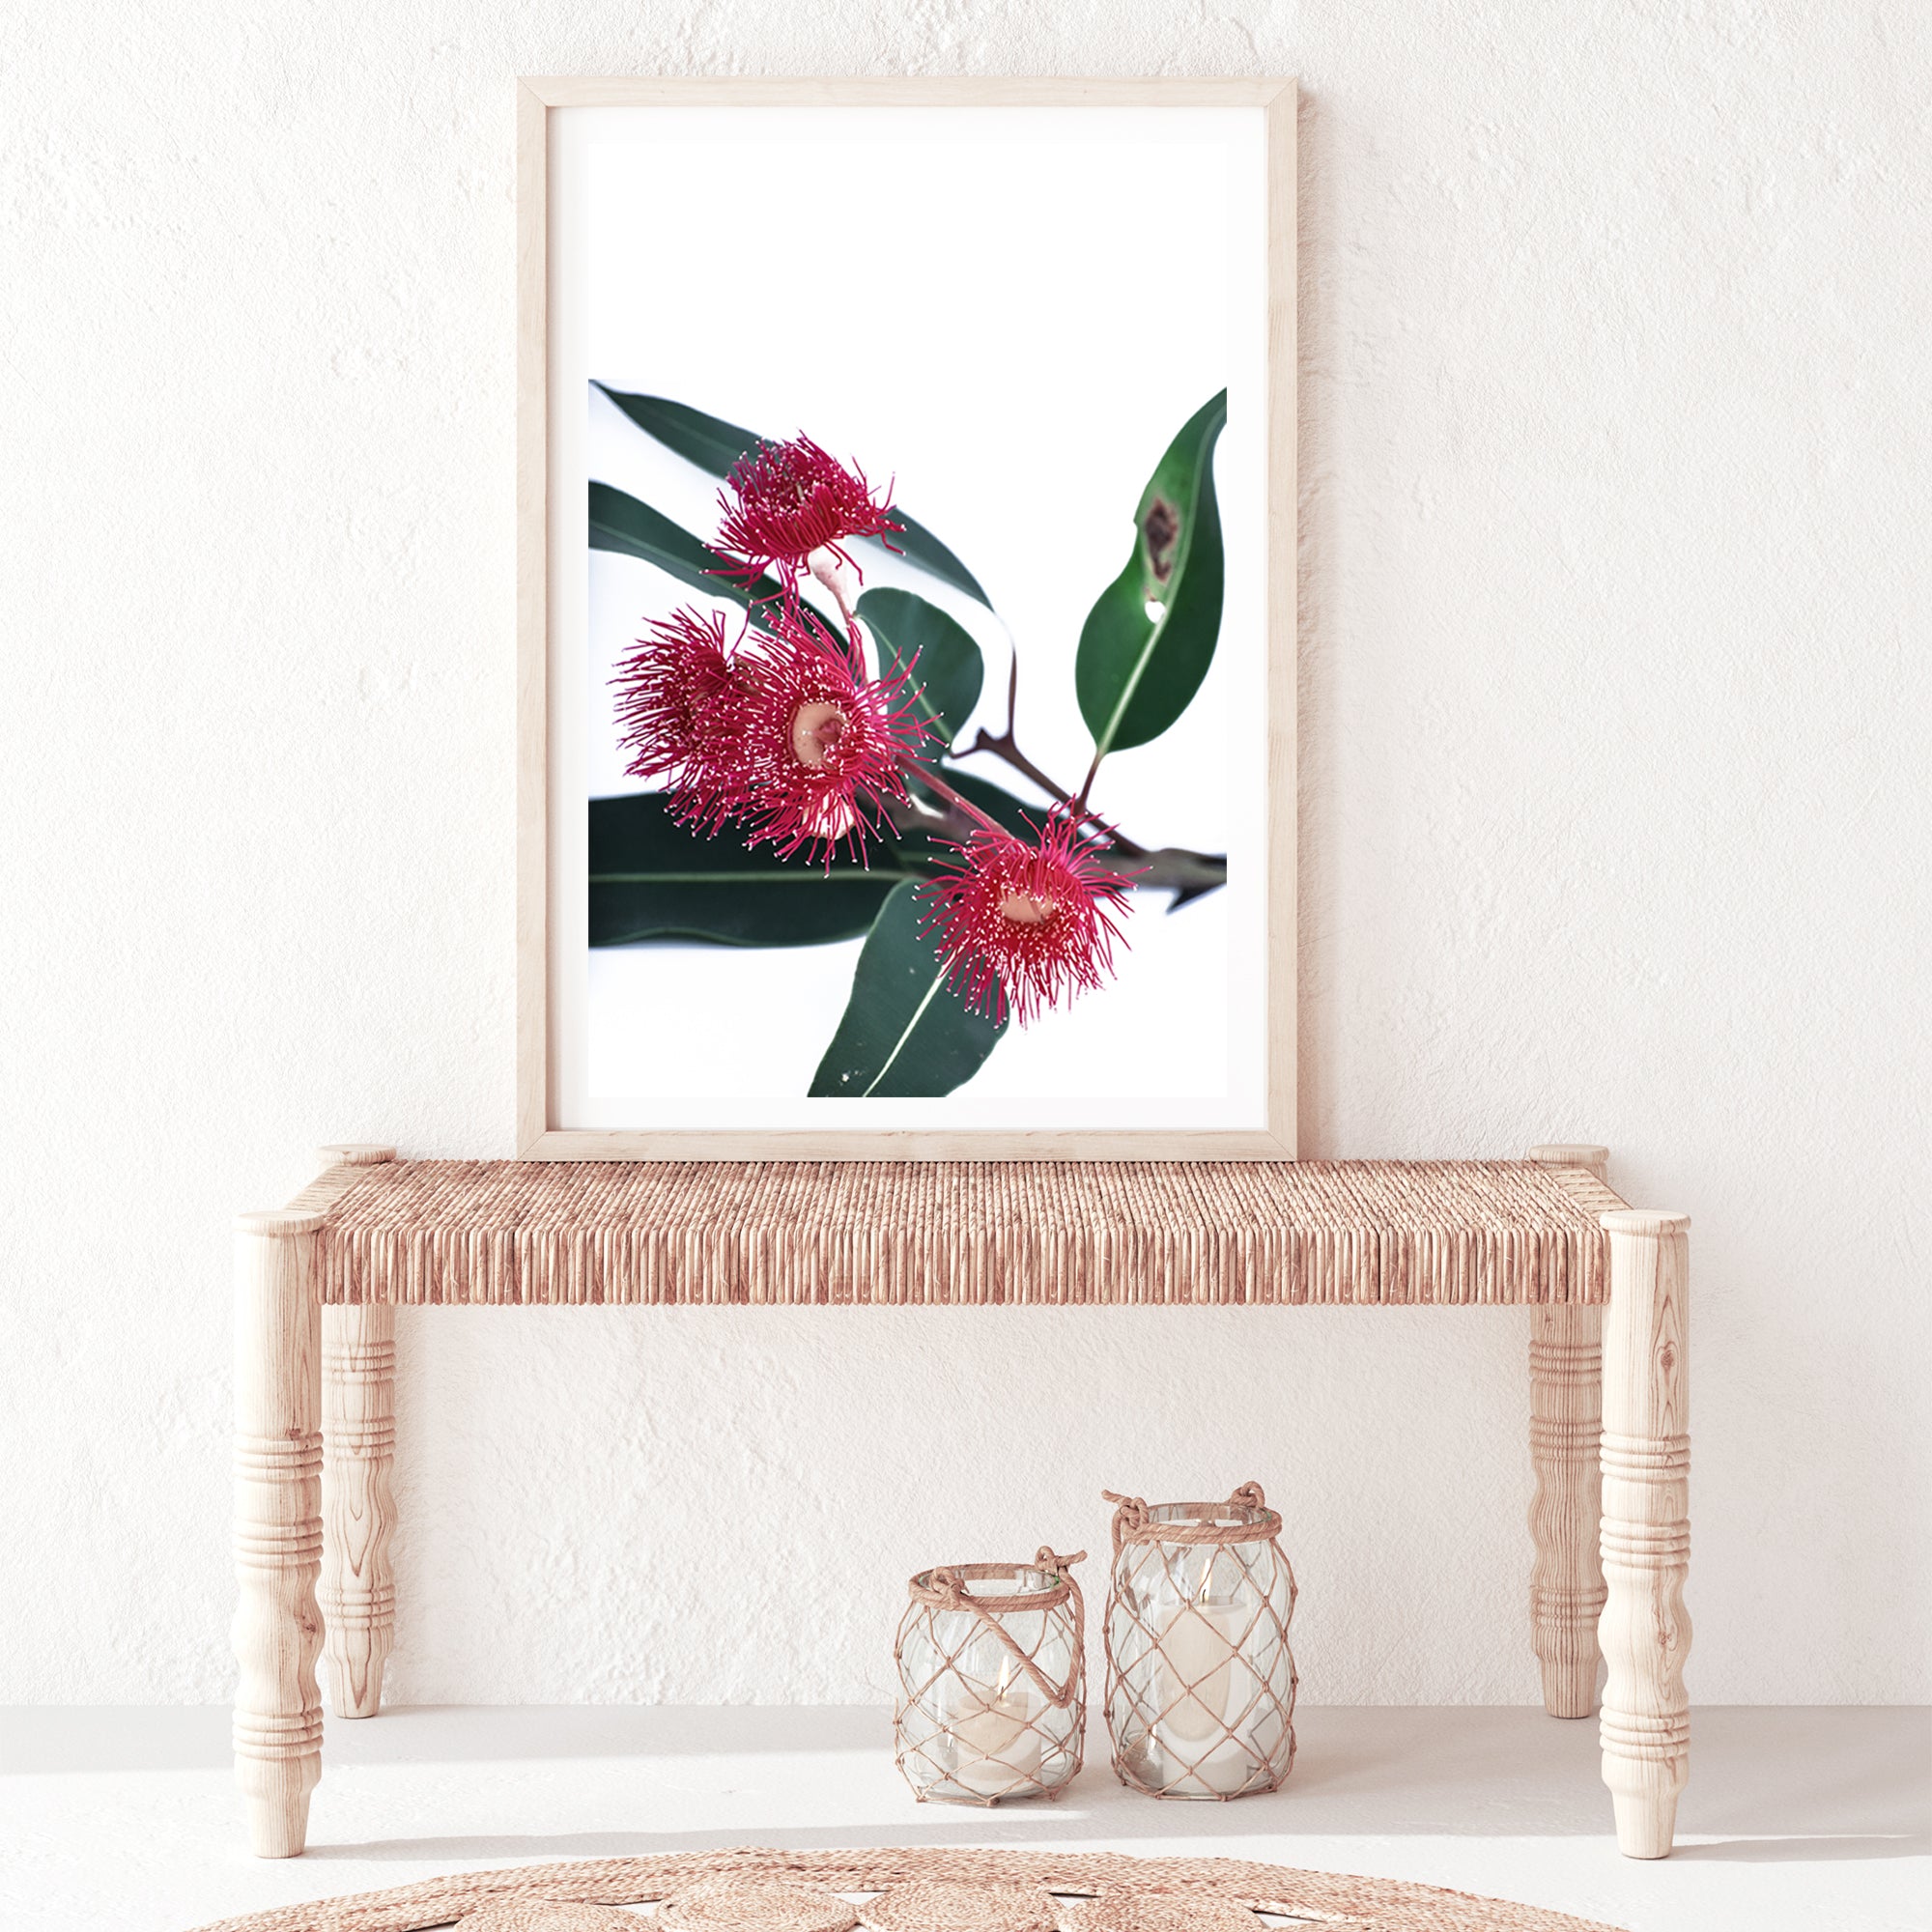 A floral photographic artwork featuring beautiful red wild flowers A and green eucalyptus leaves, available framed or unframed.